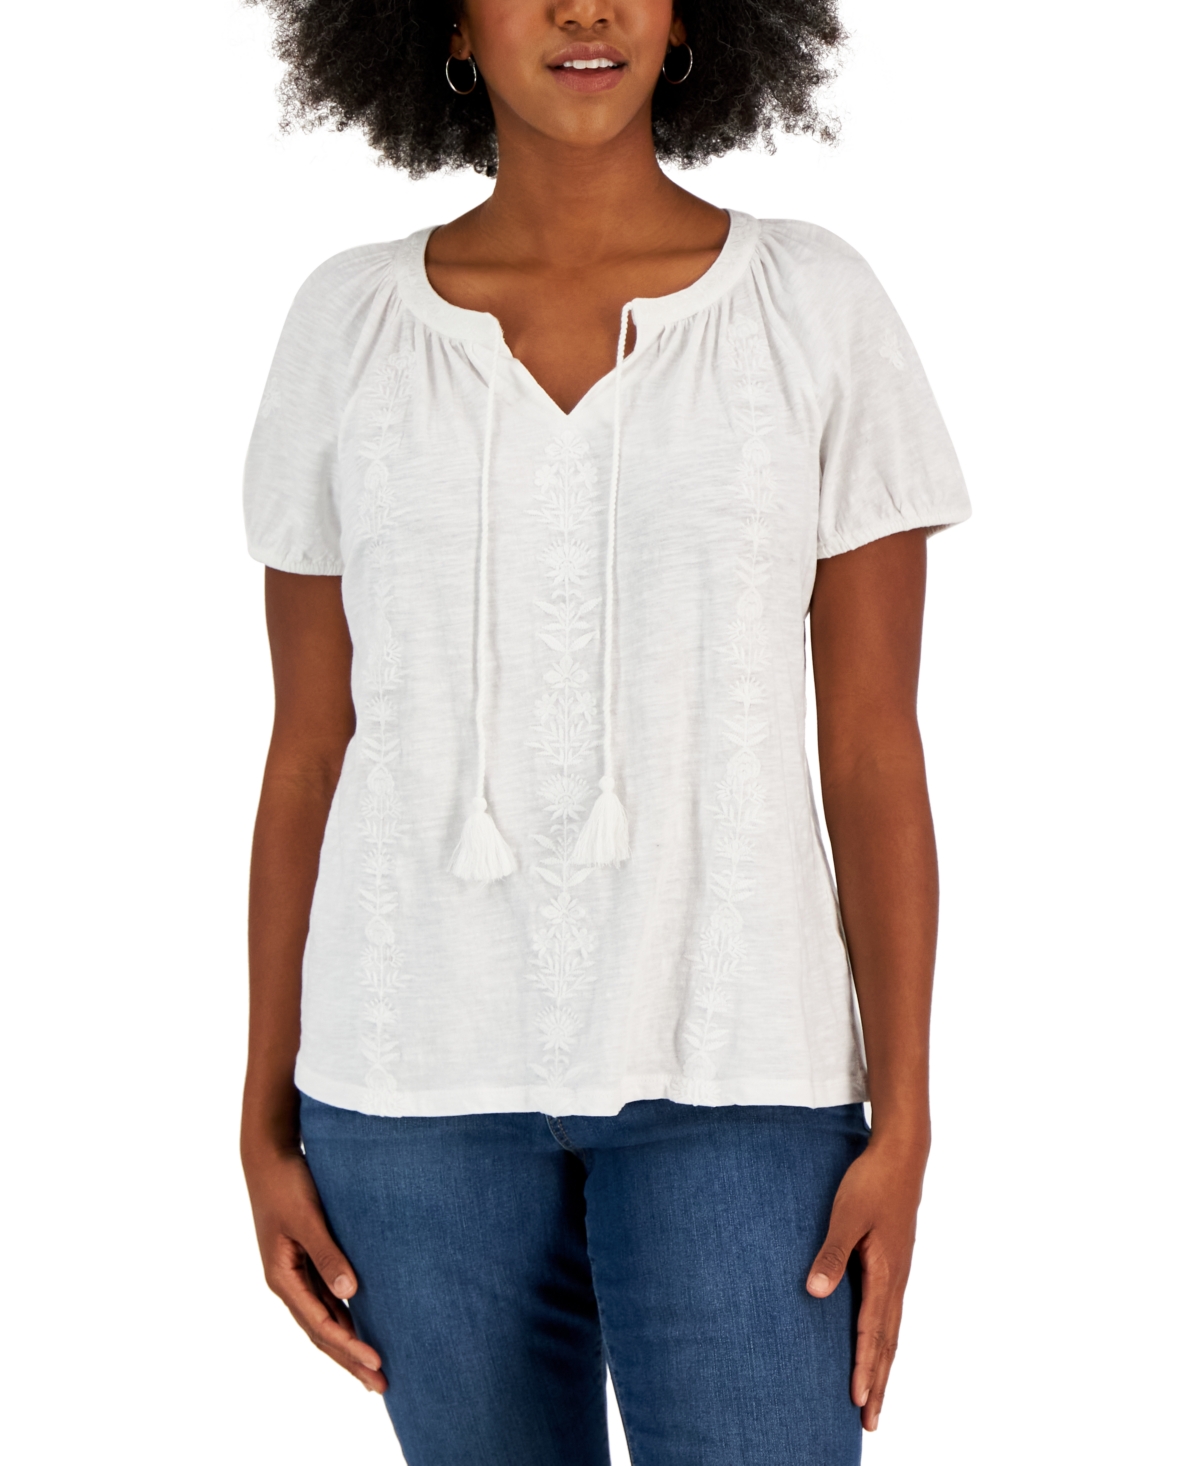 STYLE & CO WOMEN'S COTTON EMBROIDERED PEASANT TOP, CREATED FOR MACY'S